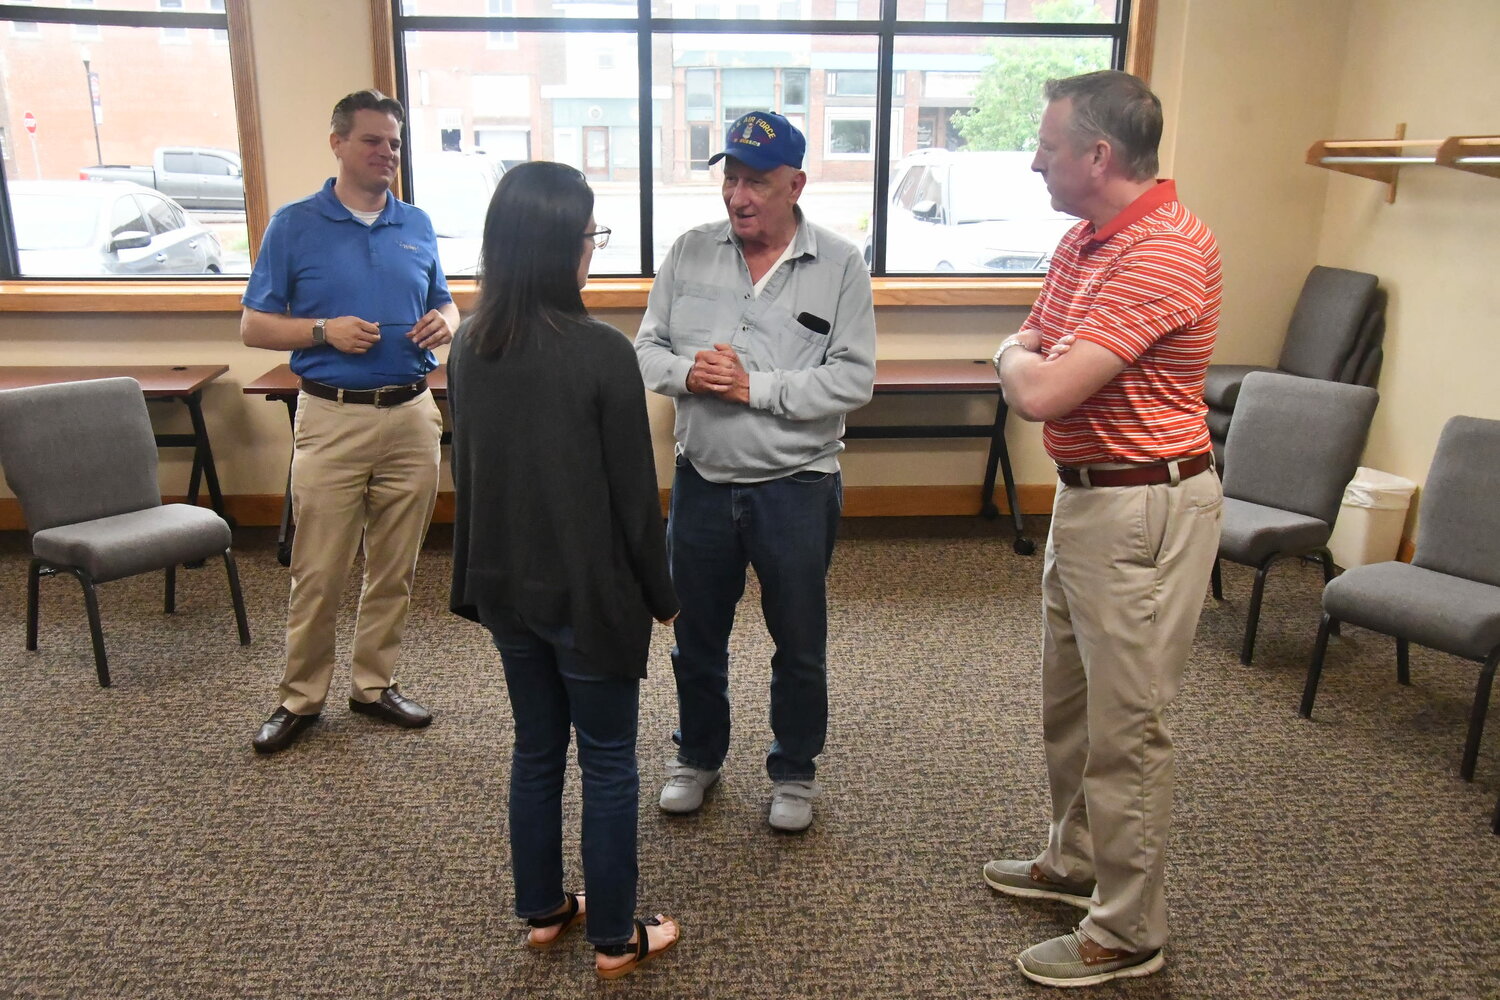 City manager Brian Crane (left), Moberly Public Works director Tom Sanders and Moberly Parks and Recreation Department employee Leslie Keeney talk with Jerry Calvin, who served as Moberly’s first-ever parks director from the 1970s through 1990s. (Photo by Eric Viccaro)